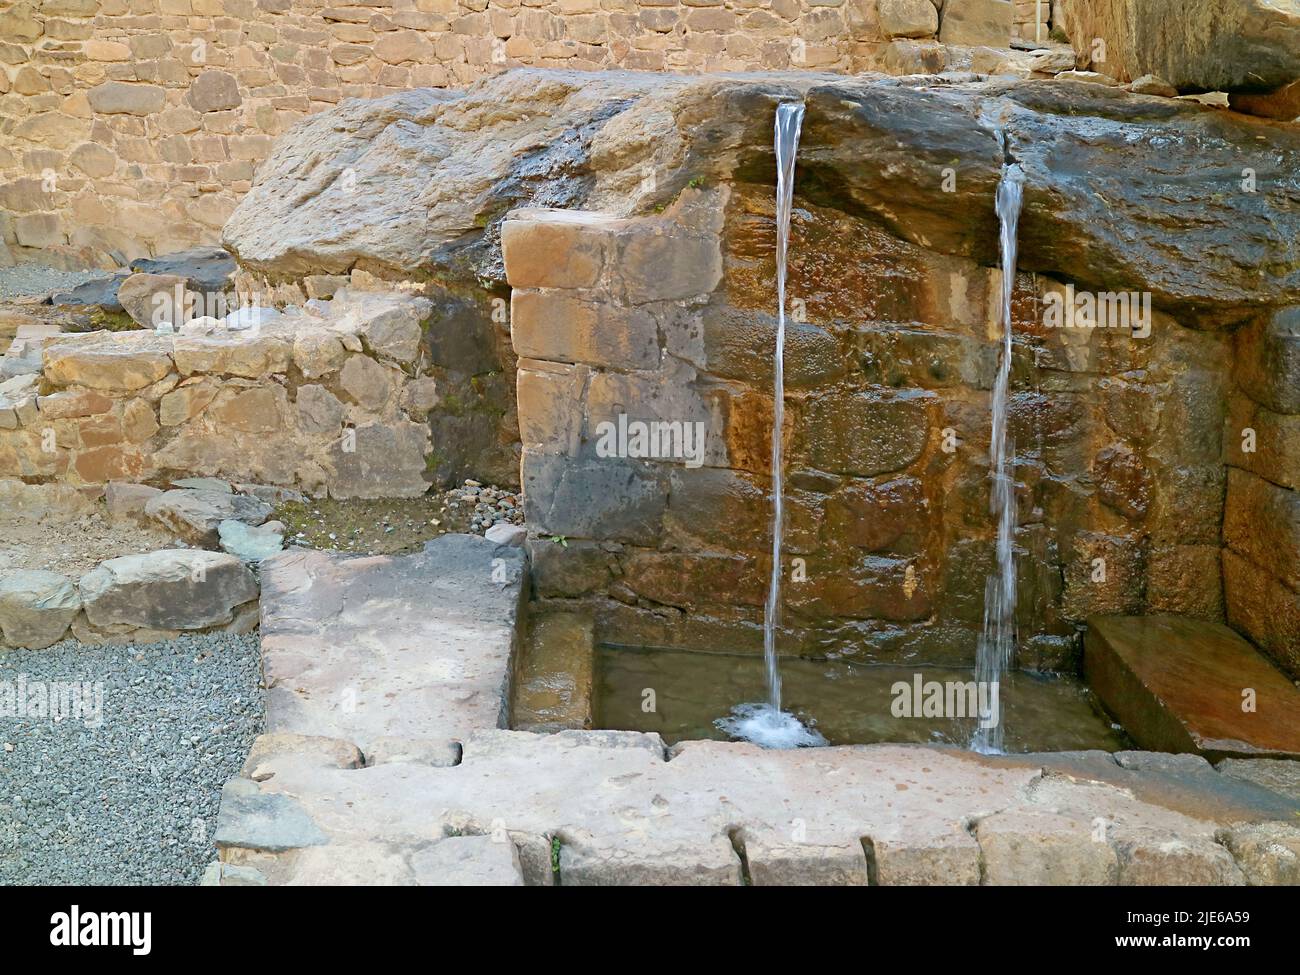 Medieval Fountain of the Water Temple at Ollantaytambo Archaeological Site, Urubamba Province, Cusco Region, Peru, South America Stock Photo